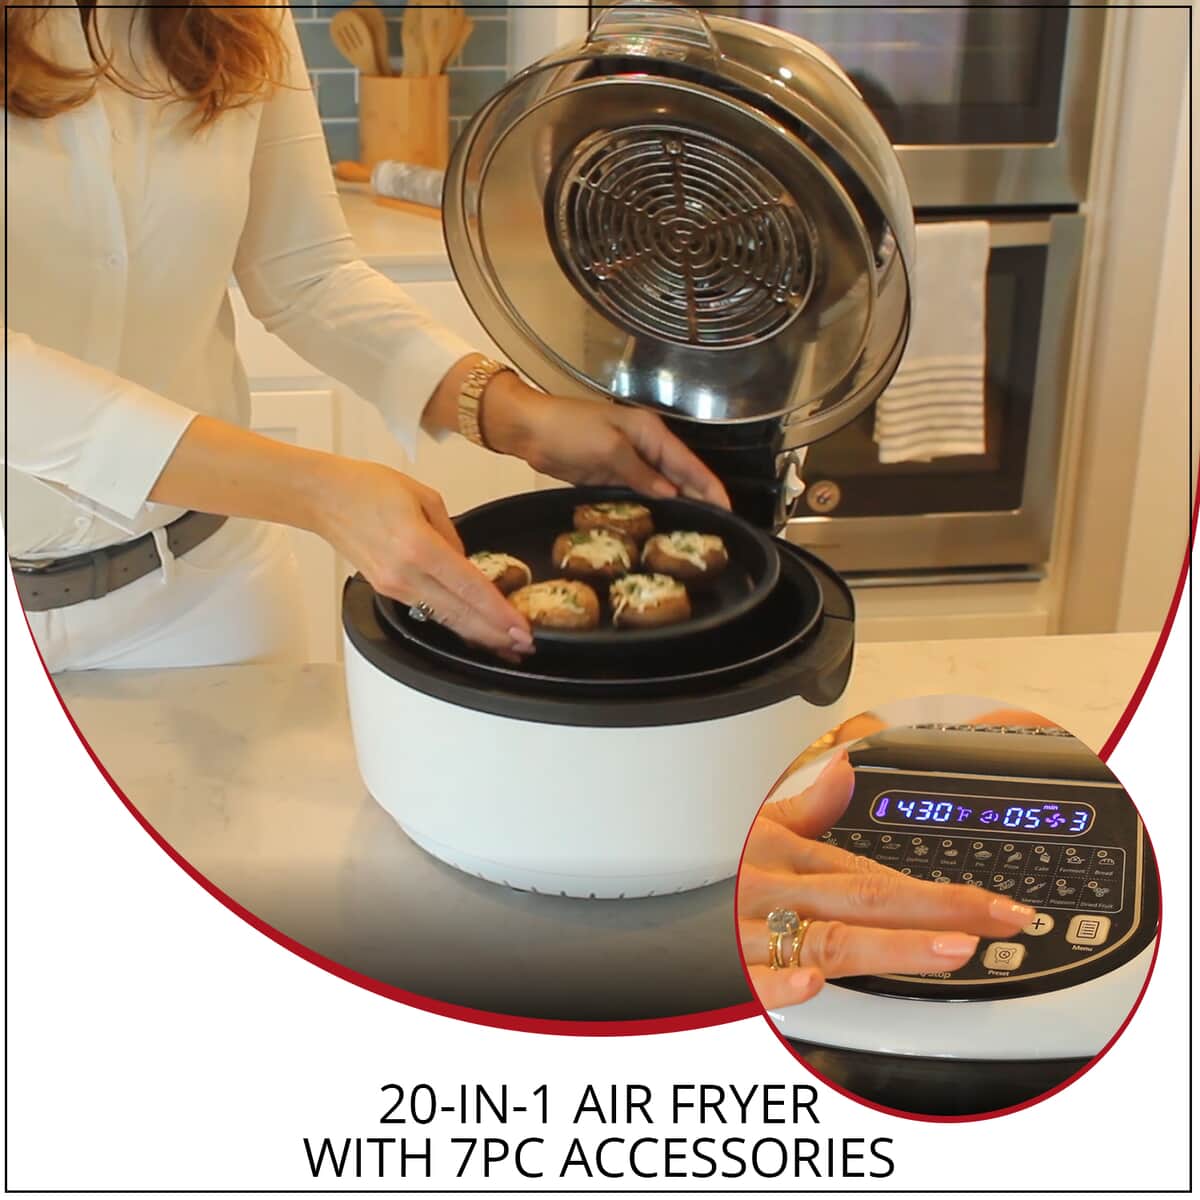 20-in-1 Air Fryer (10.5qt Capacity) with 7pc Accessories, Wi-Fi and Recipe Book- Black and White image number 1